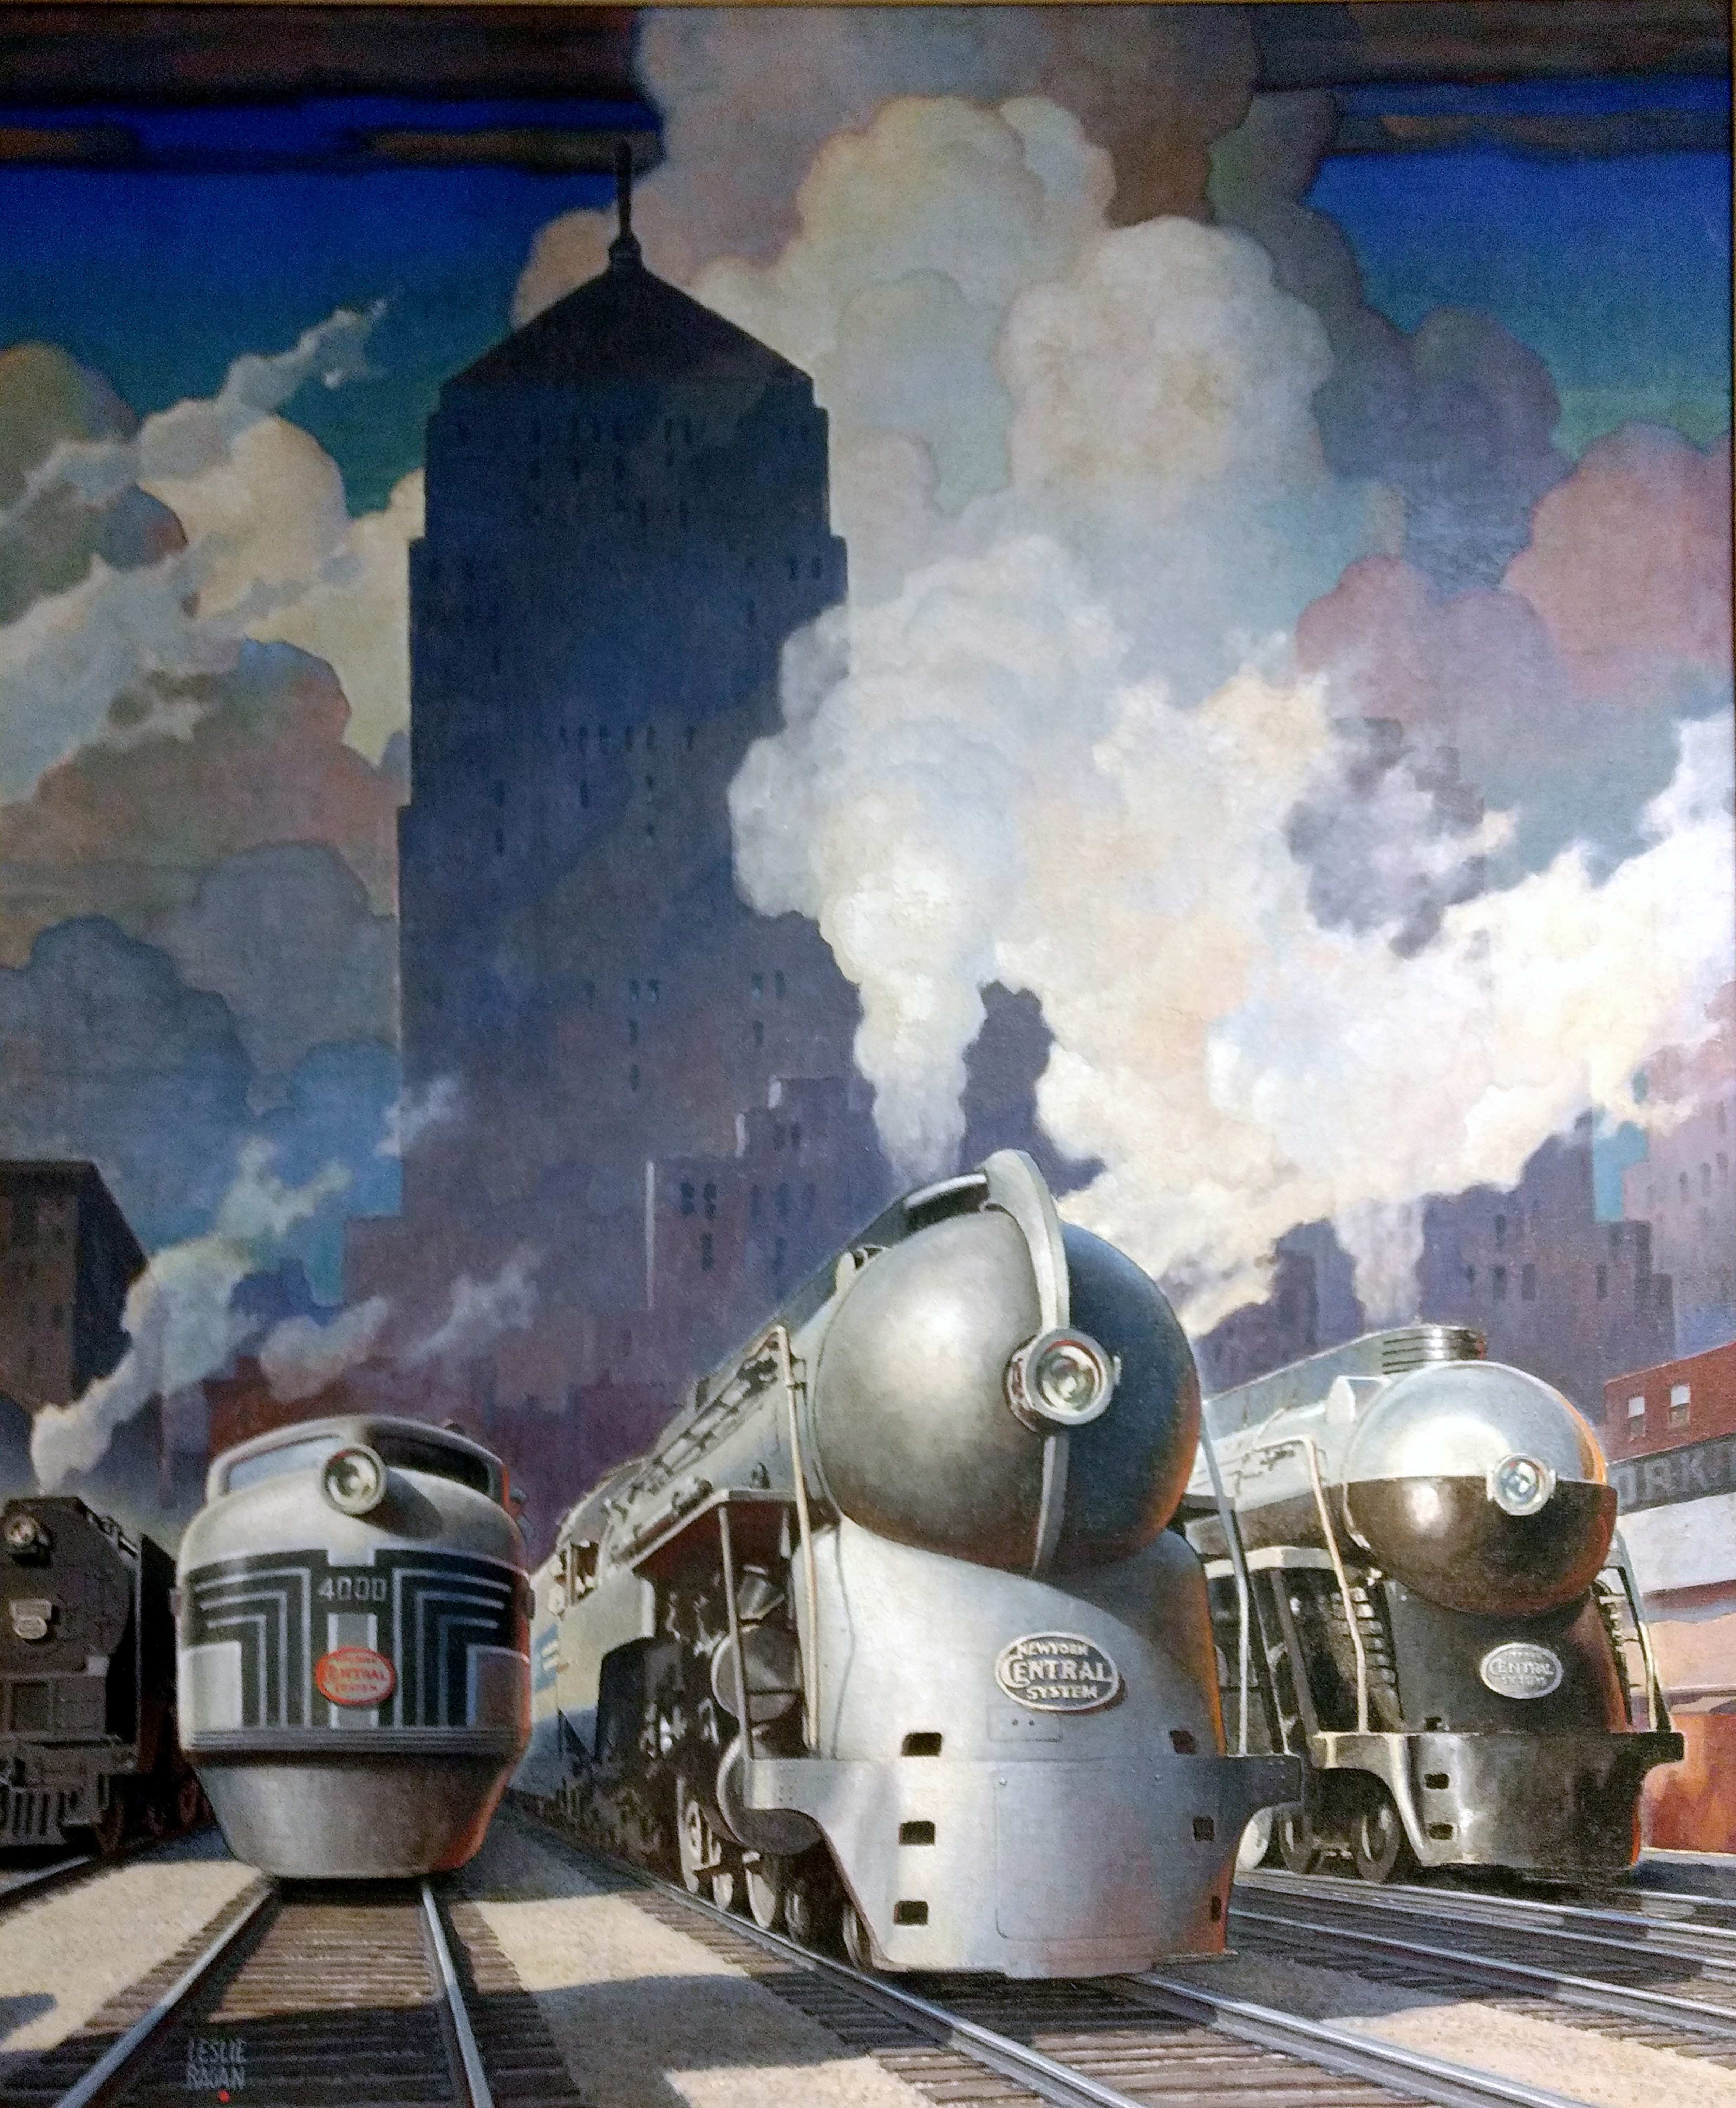 Leslie Ragan, “For the Public Service” oil on canvas 1945.